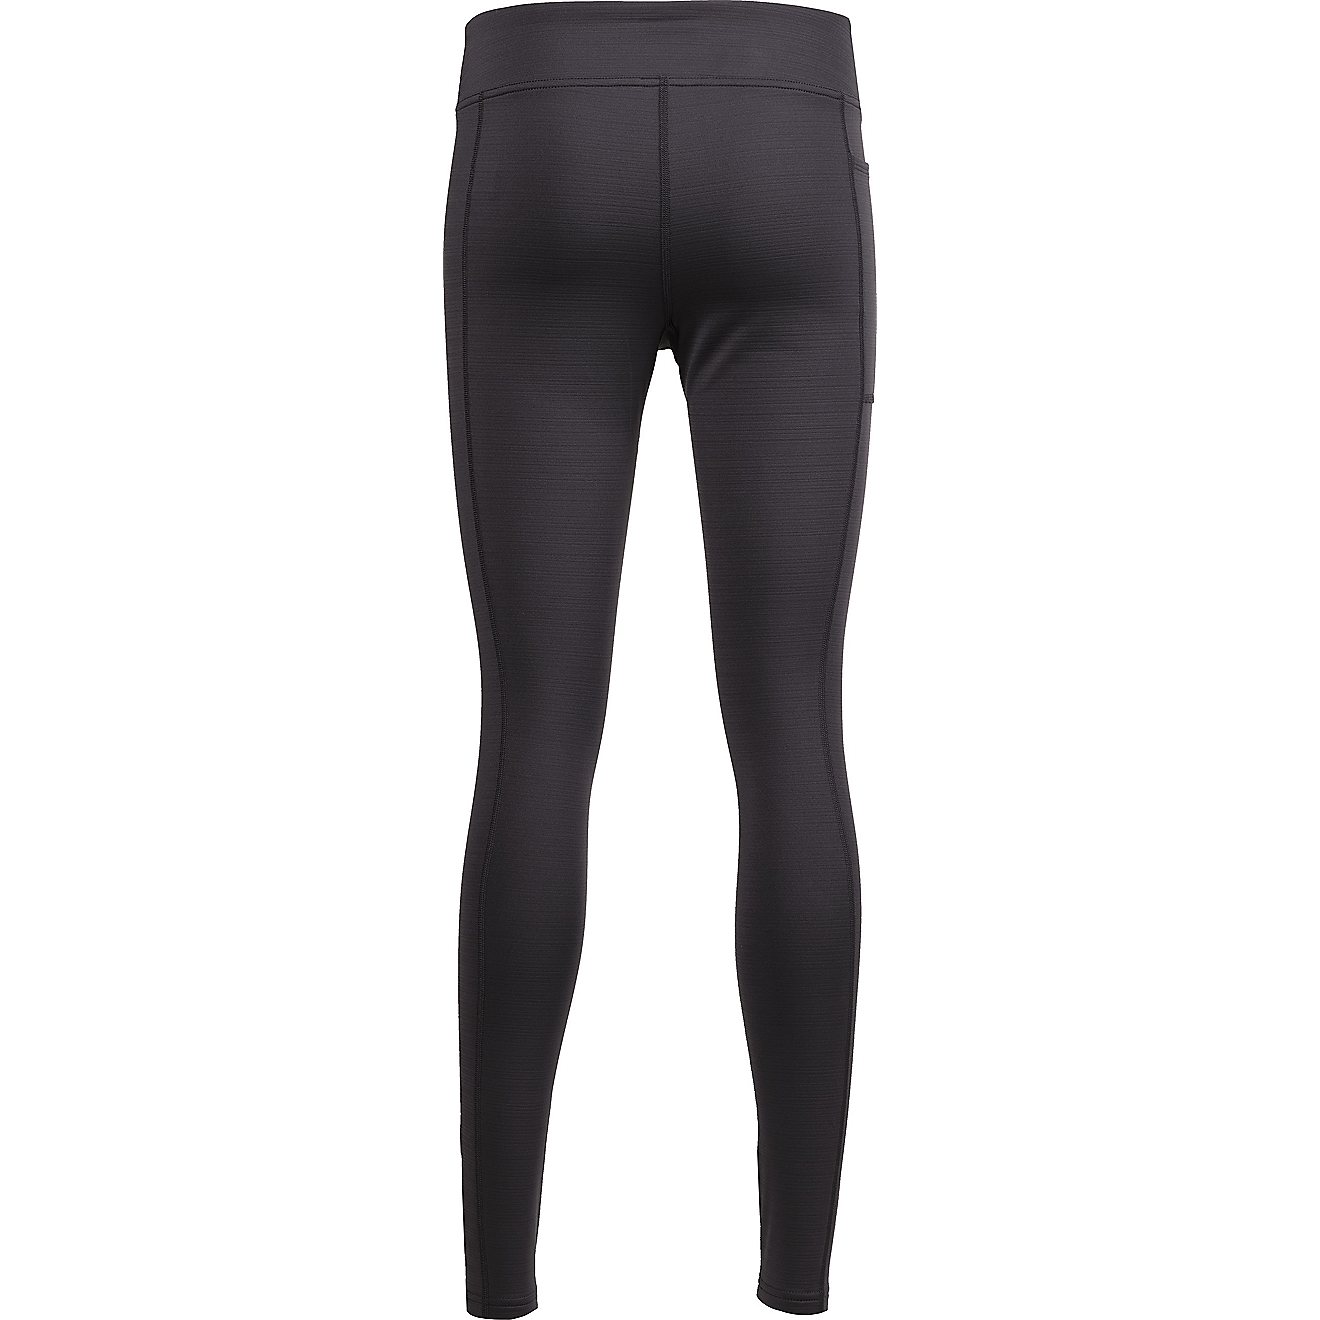 BCG Women's Cold Weather Leggings